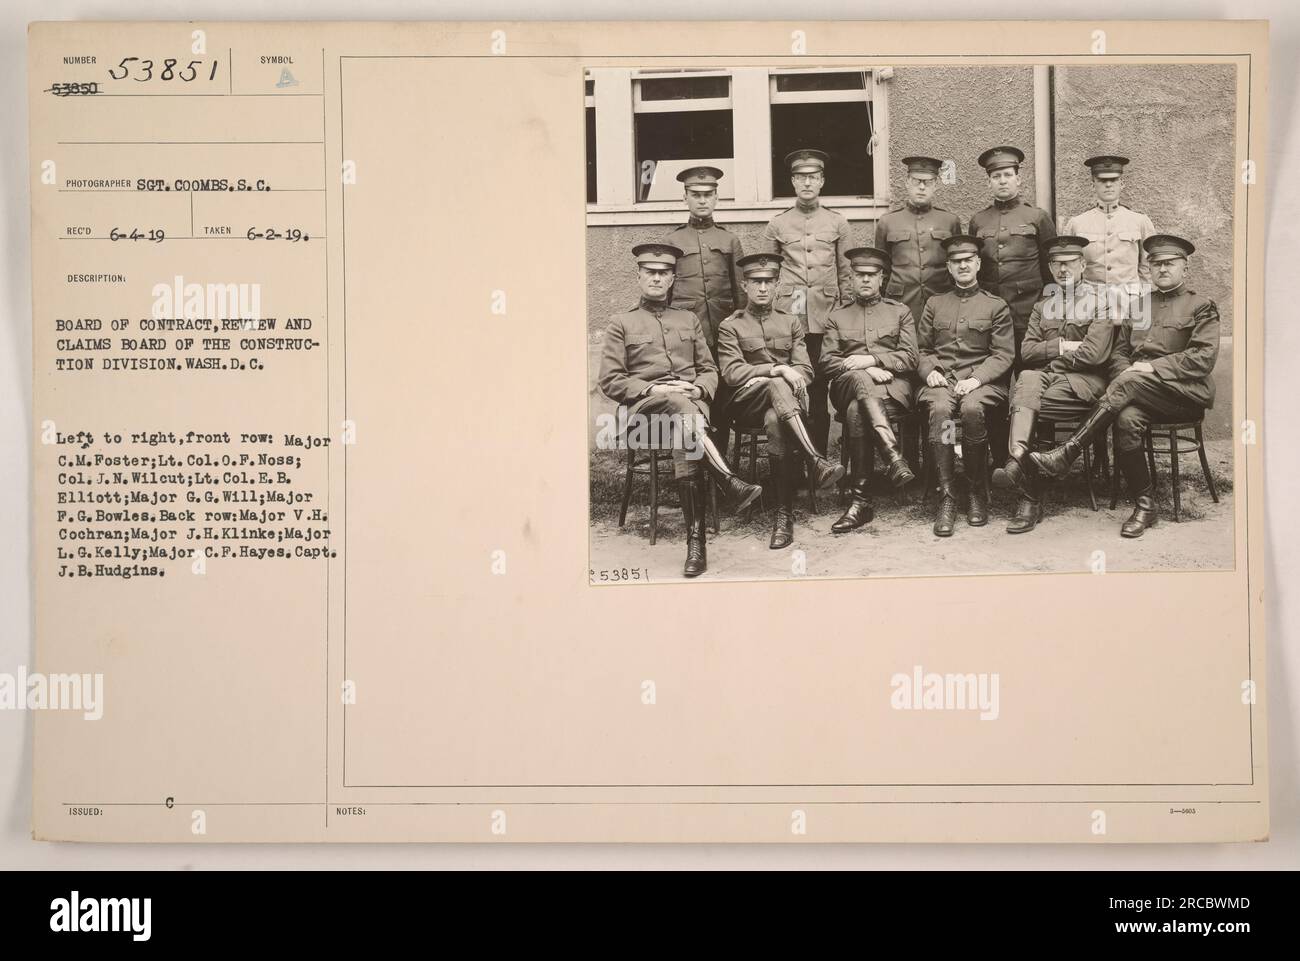 Members of the Board of Contract Review and Claims Board of the Construction Division, Washington D.C., pose for a photograph. Front row, from left to right: Major C.M. Foster, Lt. Col. O.F. Nos8, Col. J.N. Wilcut, Lt. Col. E.B. Elliott, Major G.G. Will, Major F.G. Bowles. Back row: Major V.H. Cochran, Major J.H. Klinke, Major L.G. Kelly, Major C.F. Hayes, Capt. J.B. Hudgins. (Photograph taken on June 2, 1919, by Sgt. Coombs) Stock Photo